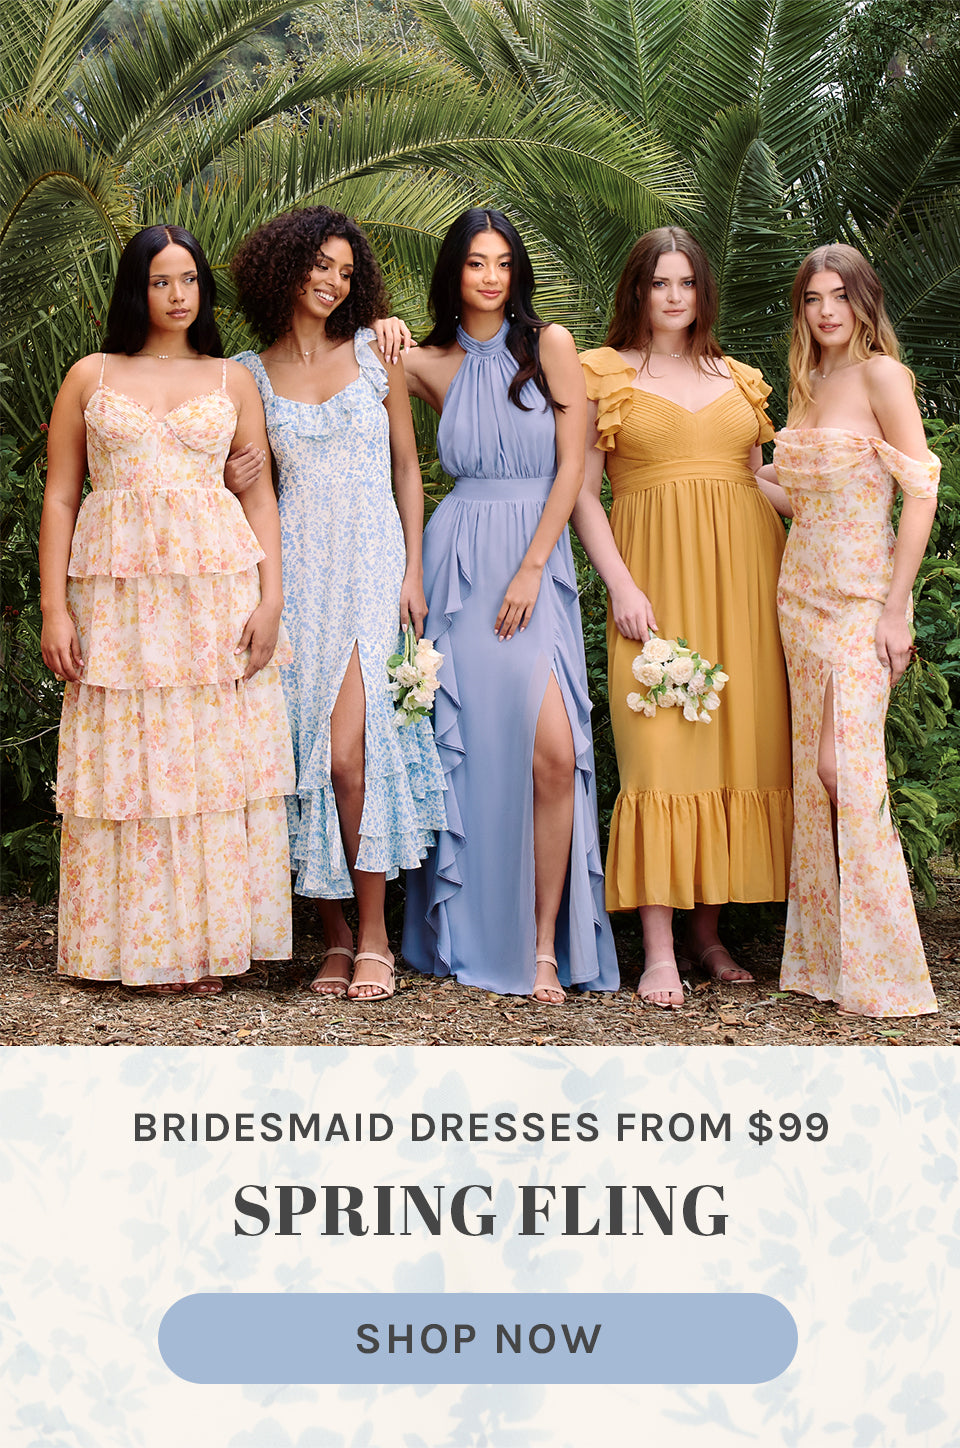 Bridesmaids Dresses Available Online & In Store